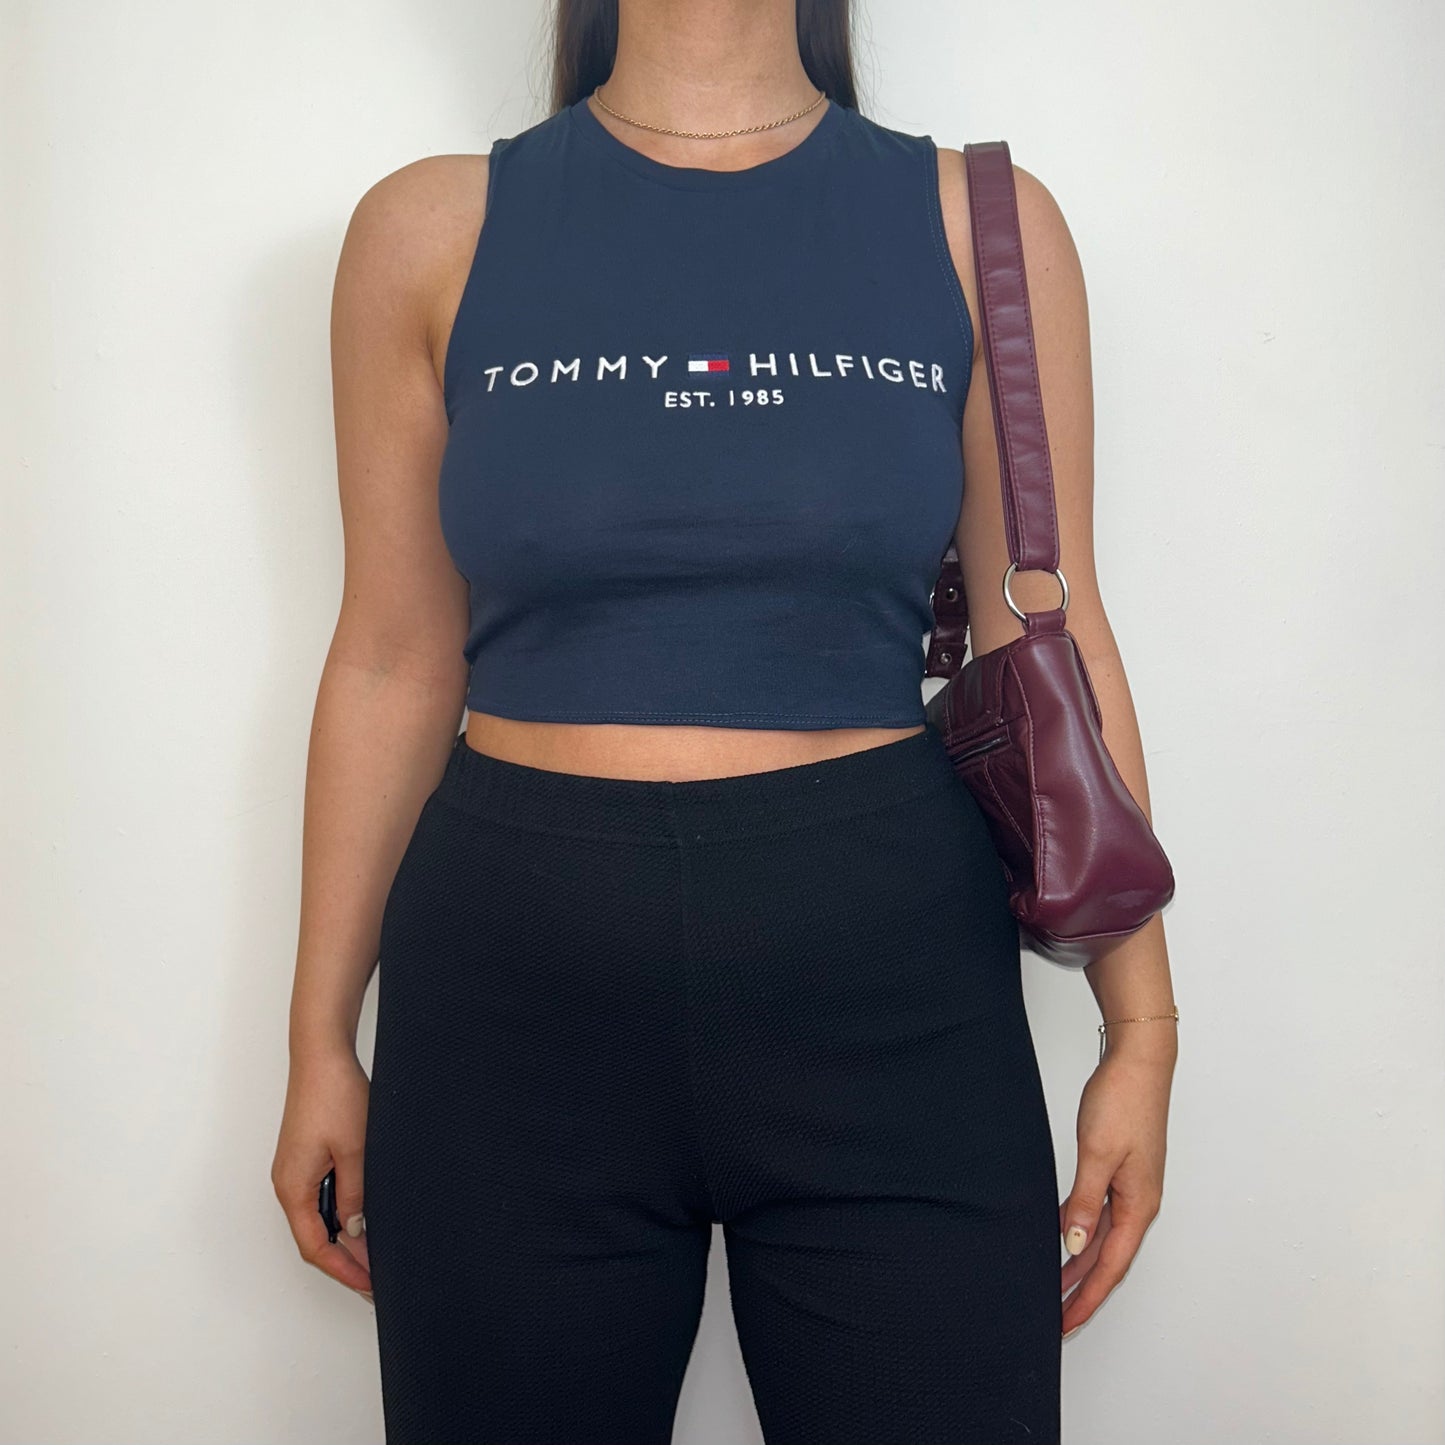 navy sleeveless crop top with white tommy hilfiger logo shown on a model wearing black trousers and a burgundy shoulder bag